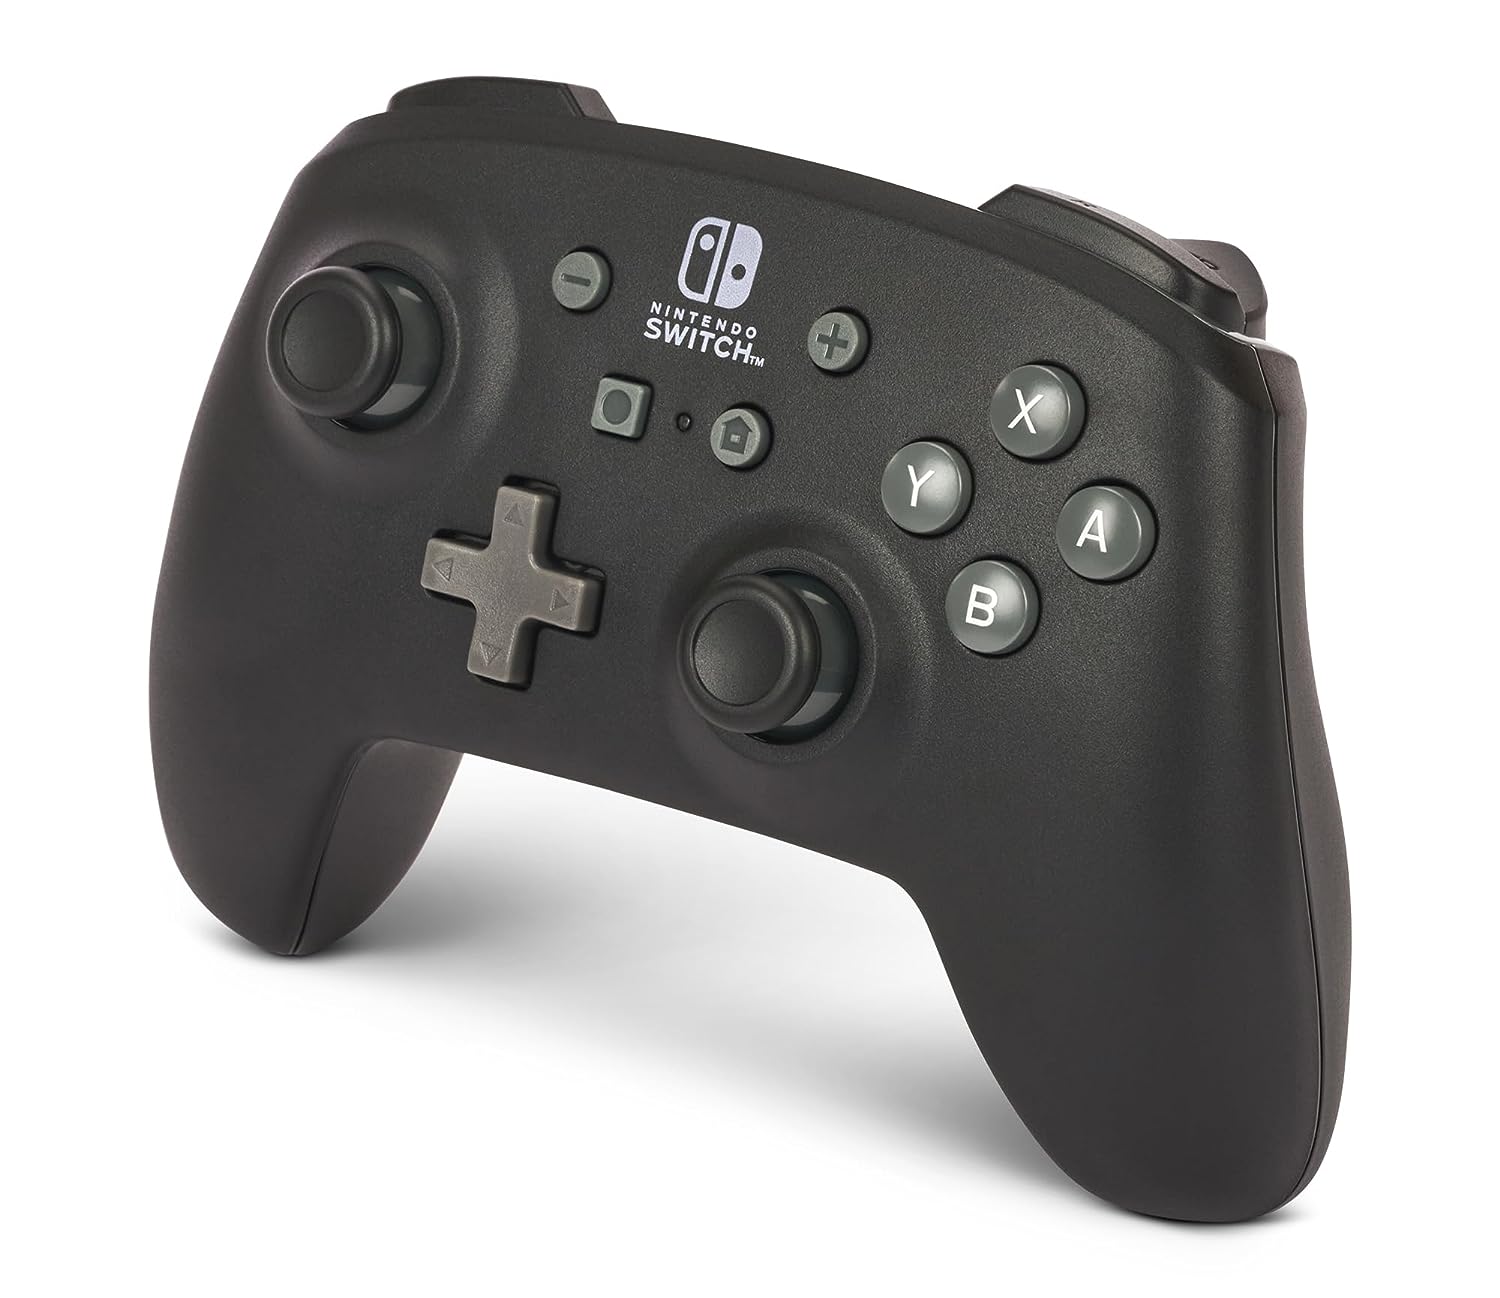  8Bitdo Pro 2 Bluetooth Controller for Switch/Switch OLED, PC,  macOS, Android, Steam & Raspberry Pi (Black Edition) - Nintendo Switch &  Sn30 Pro Bluetooth Gamepad (Gray Edition) - Nintendo Switch 